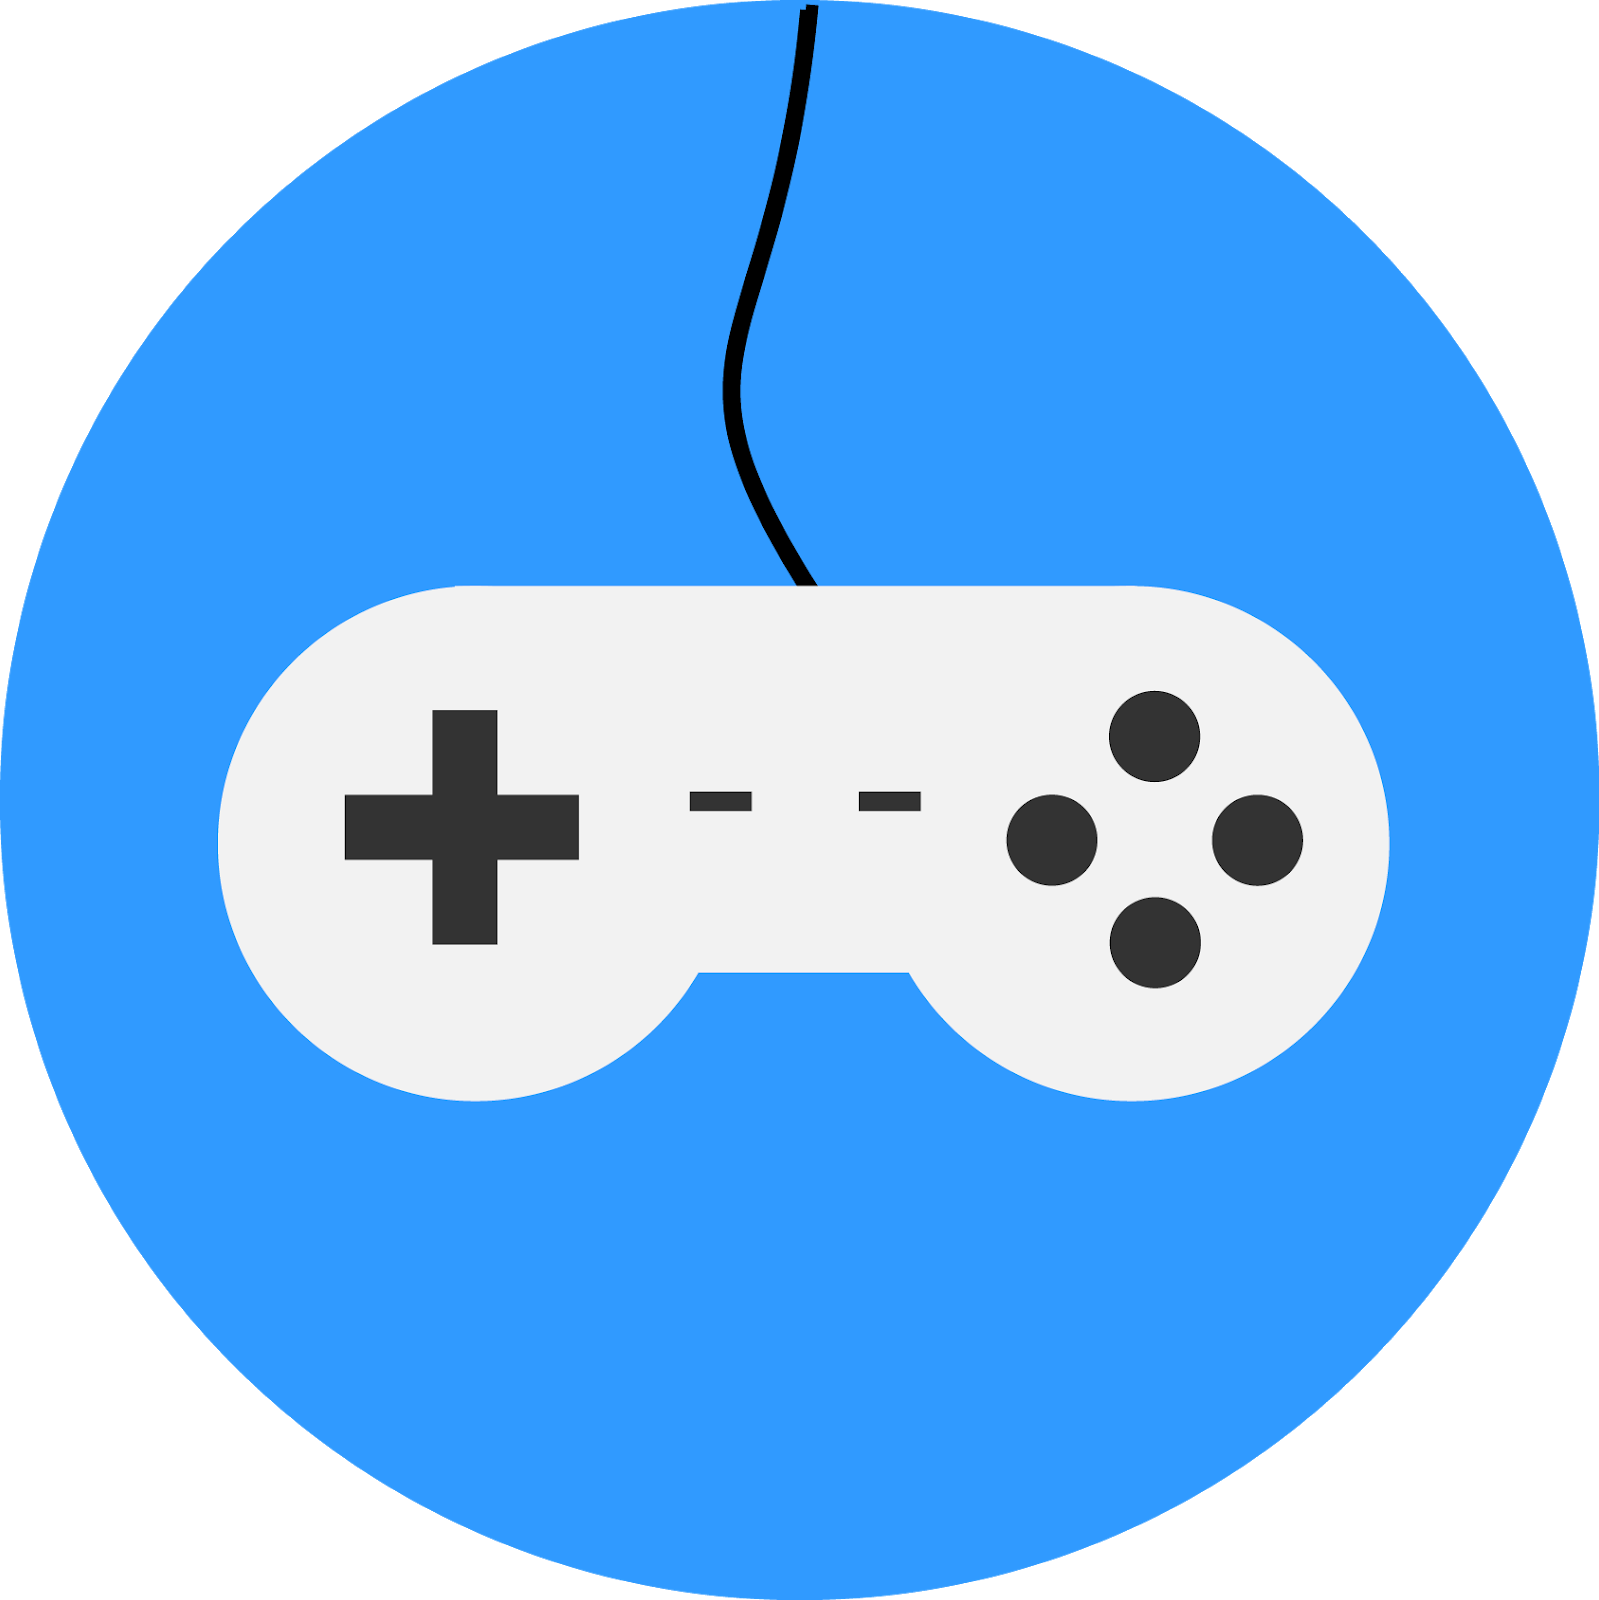 game icon vector png